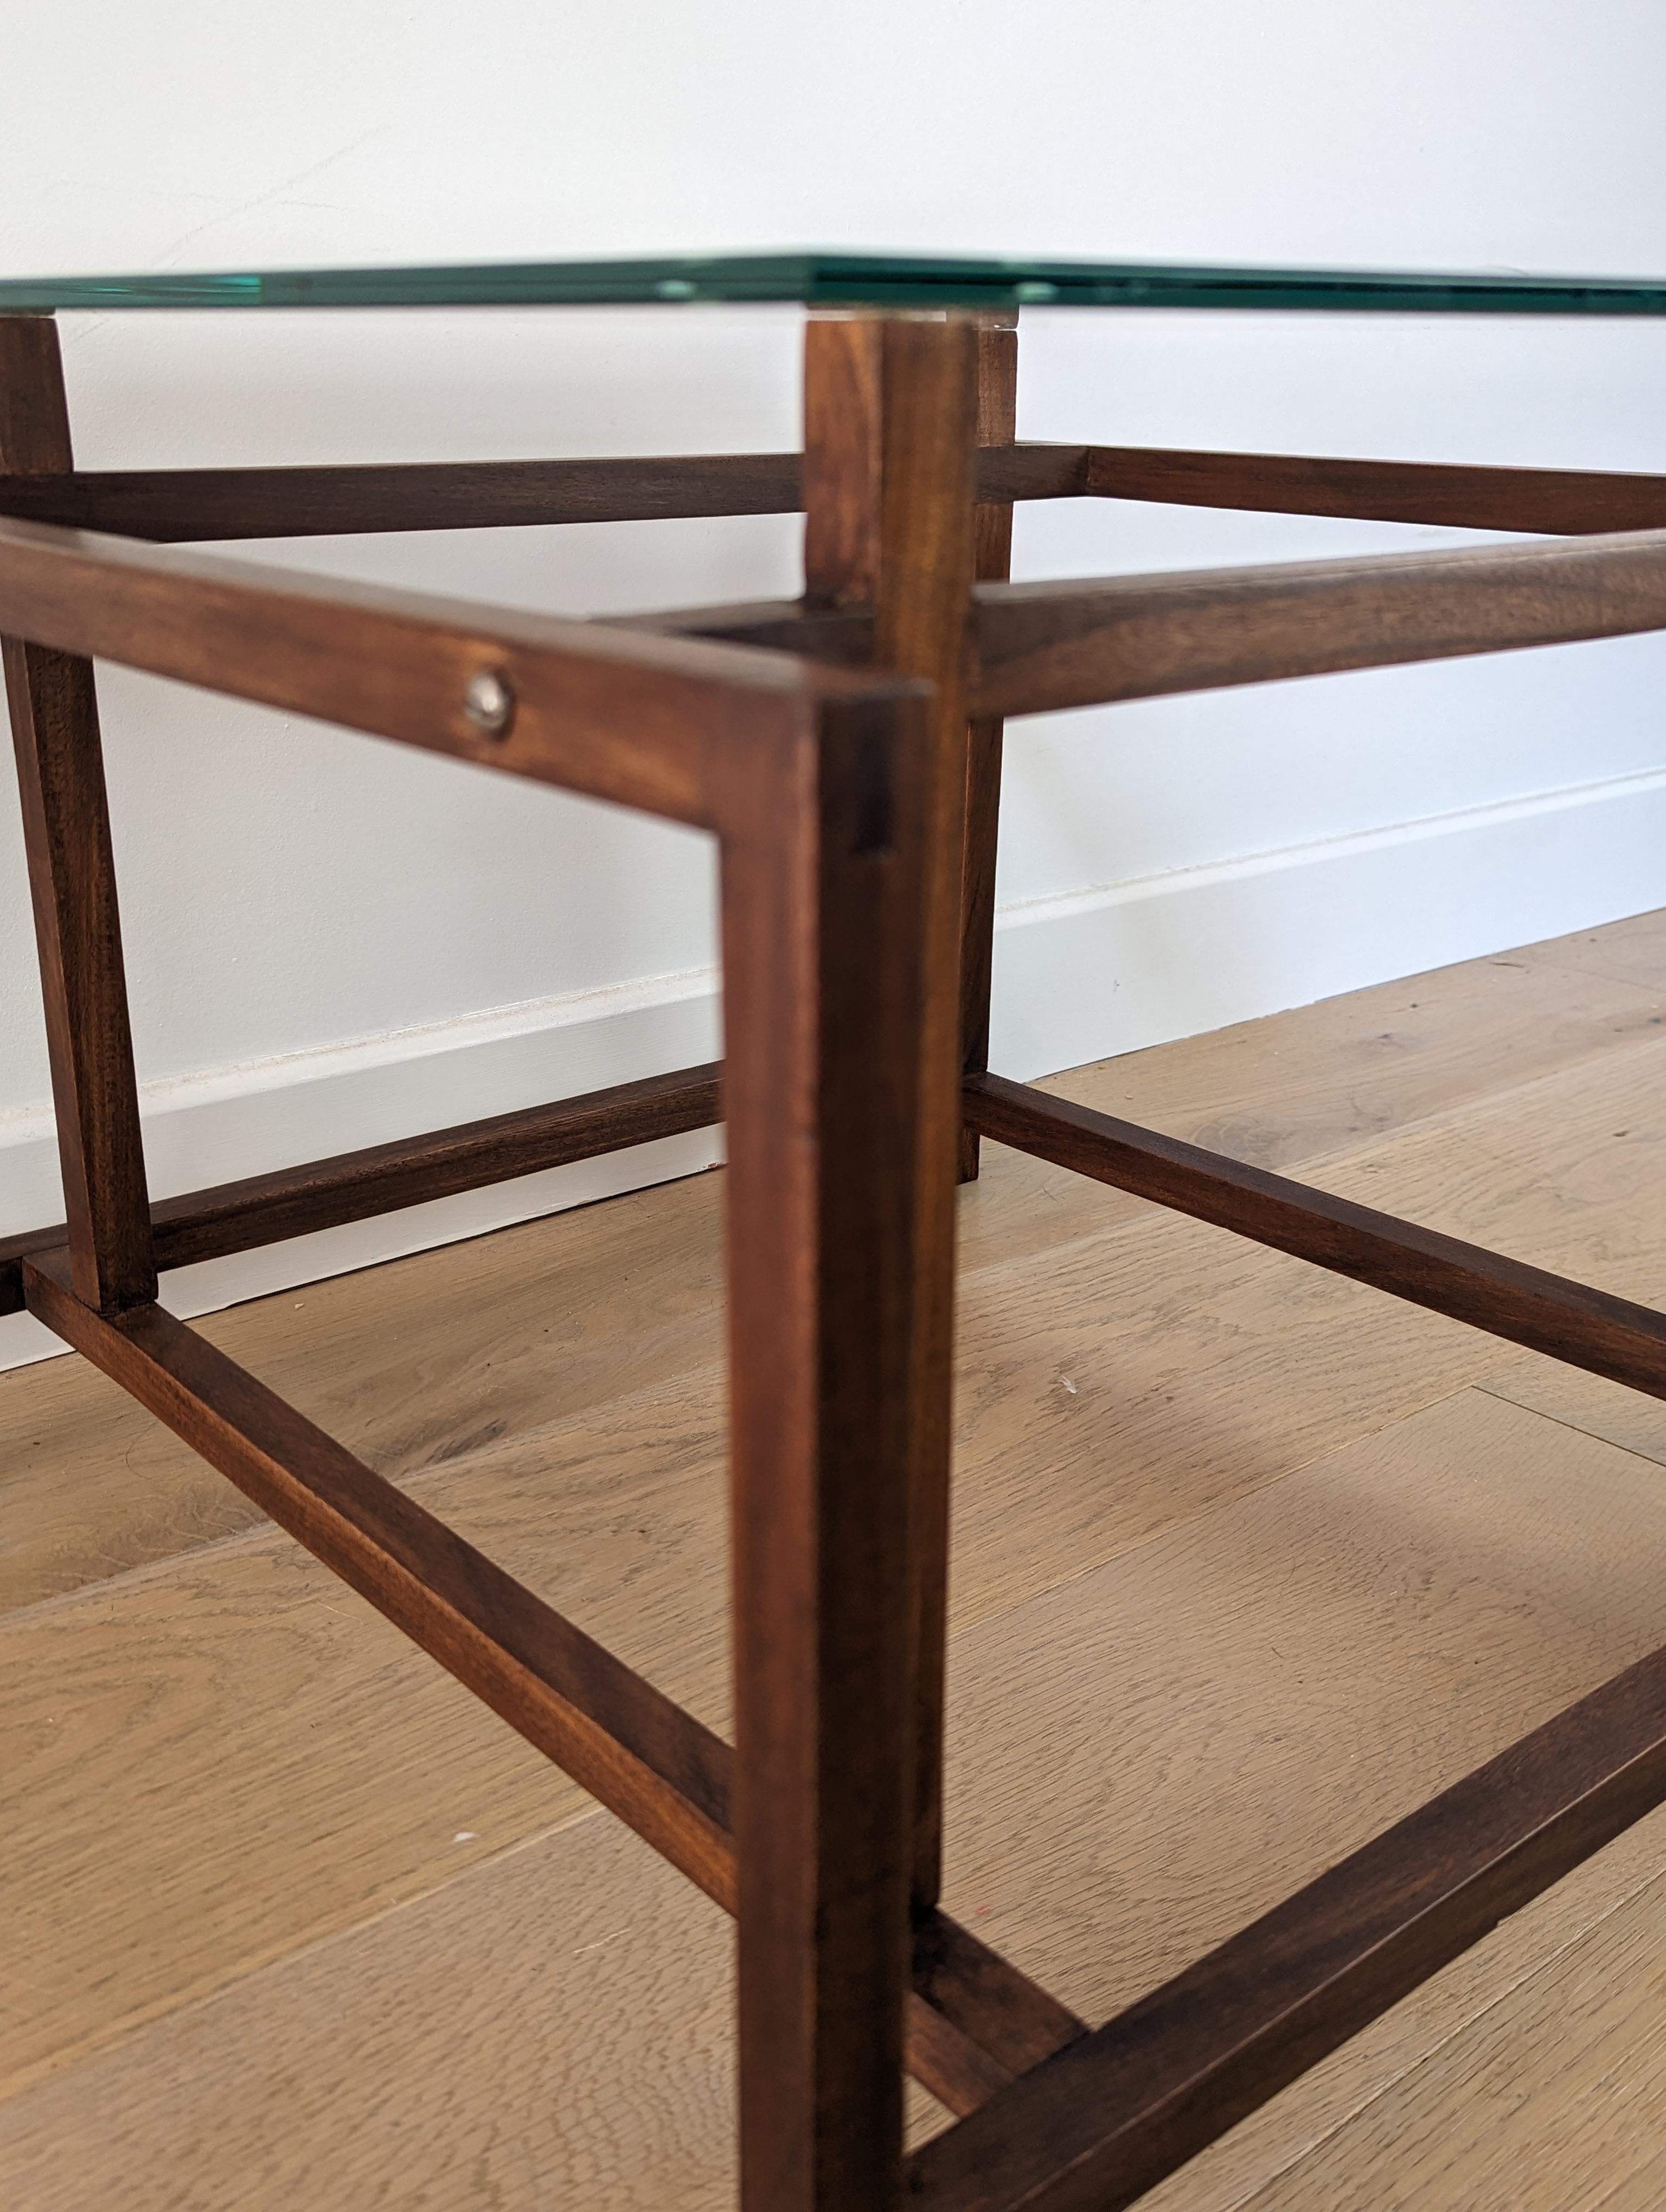 Henning Norgaard for Comfort side table in teak with glass table top For Sale 1